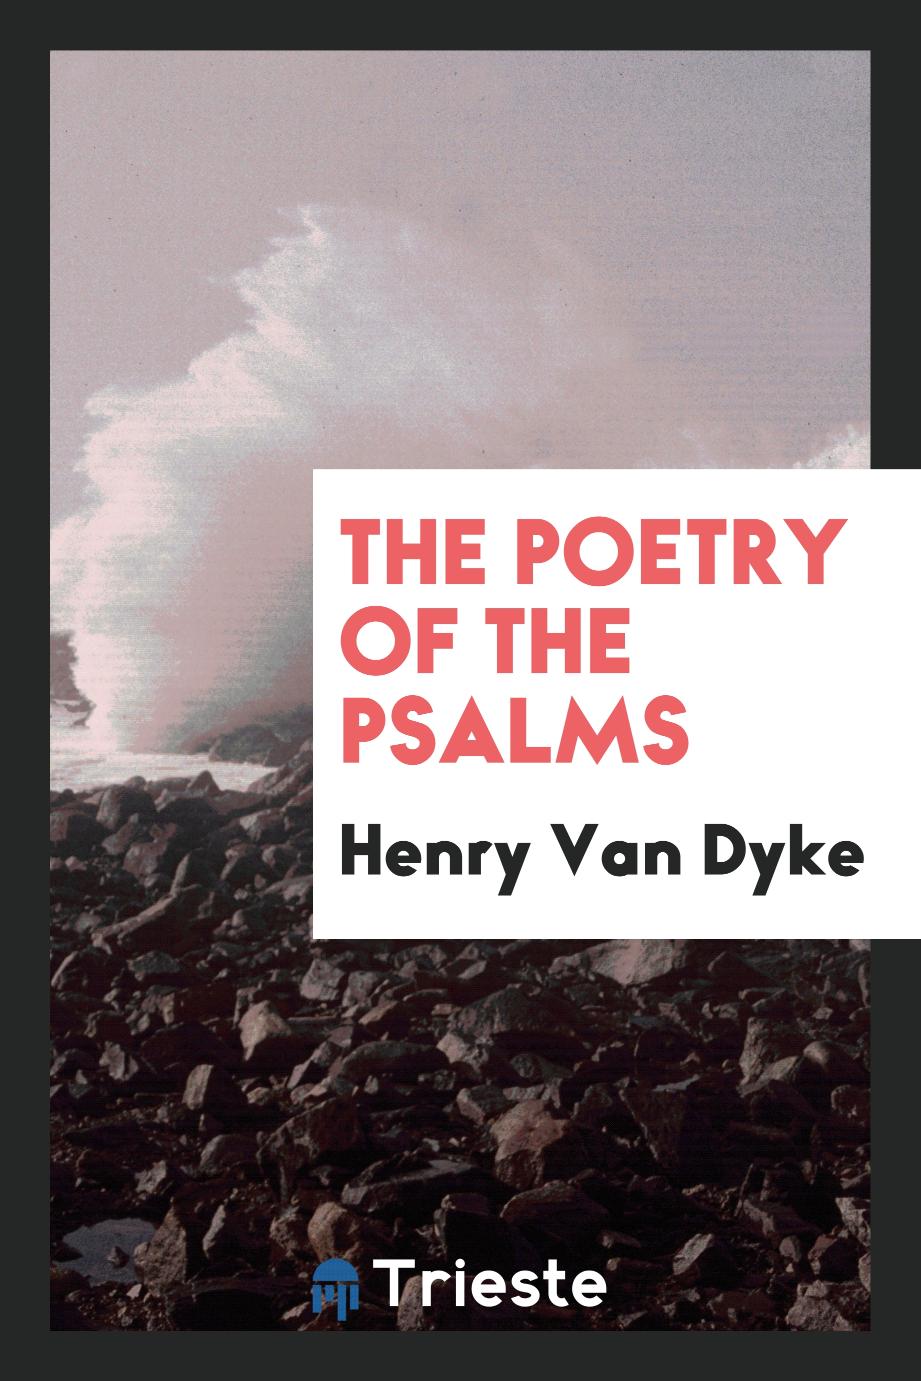 The poetry of the Psalms